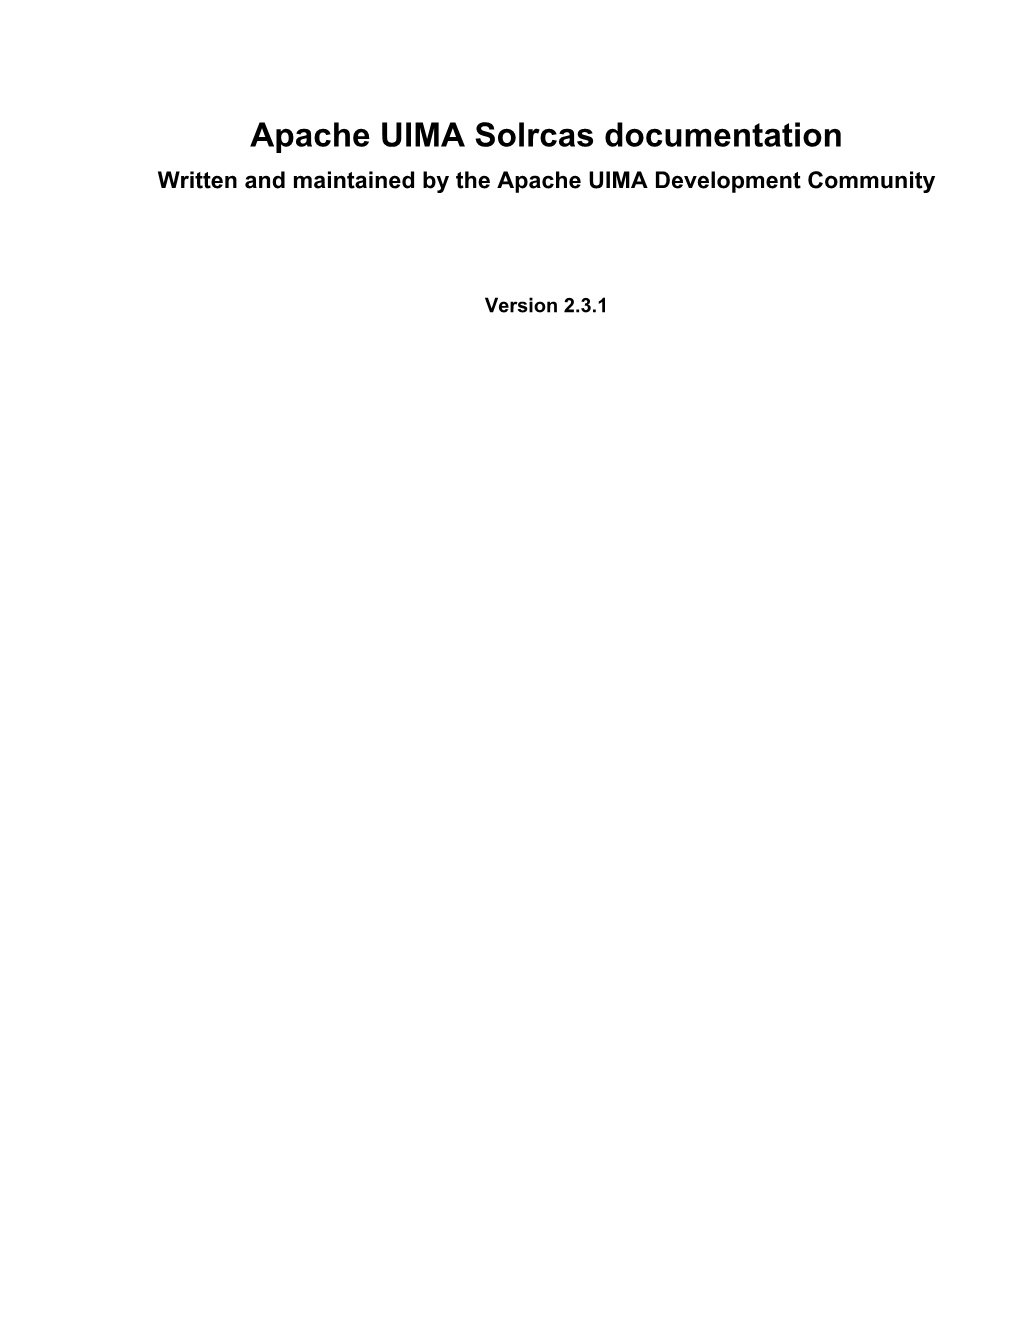 Apache UIMA Solrcas Documentation Written and Maintained by the Apache UIMA Development Community